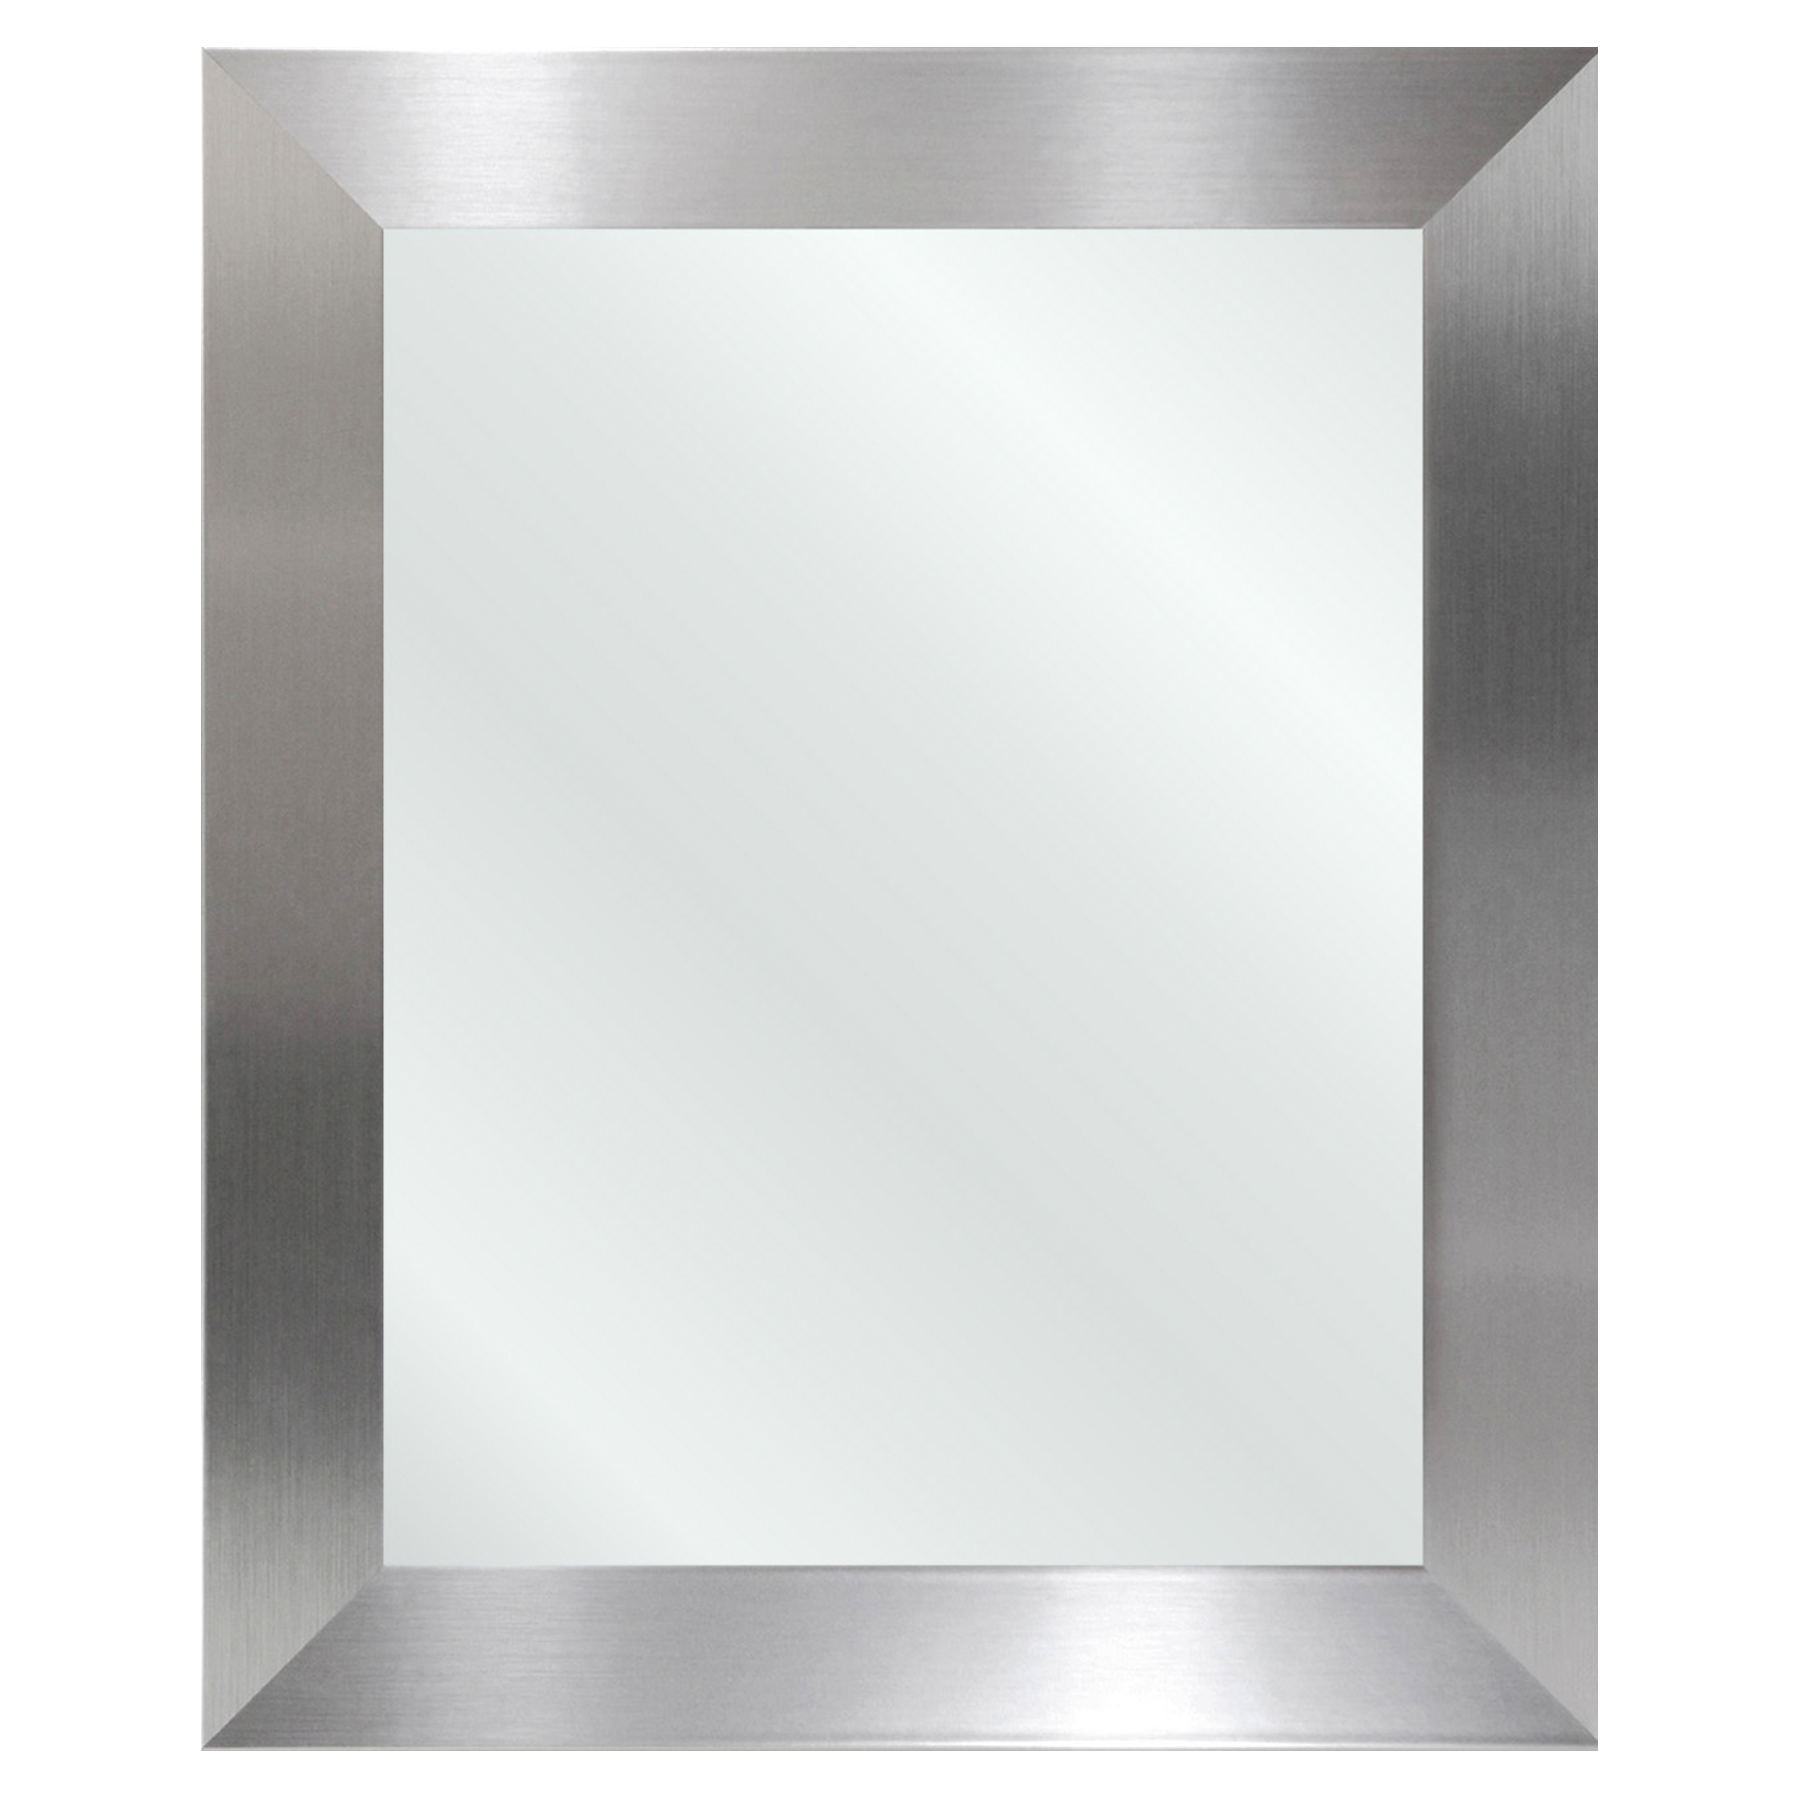 A photo of a custom framed stainless steel mirror from Hall of Frames